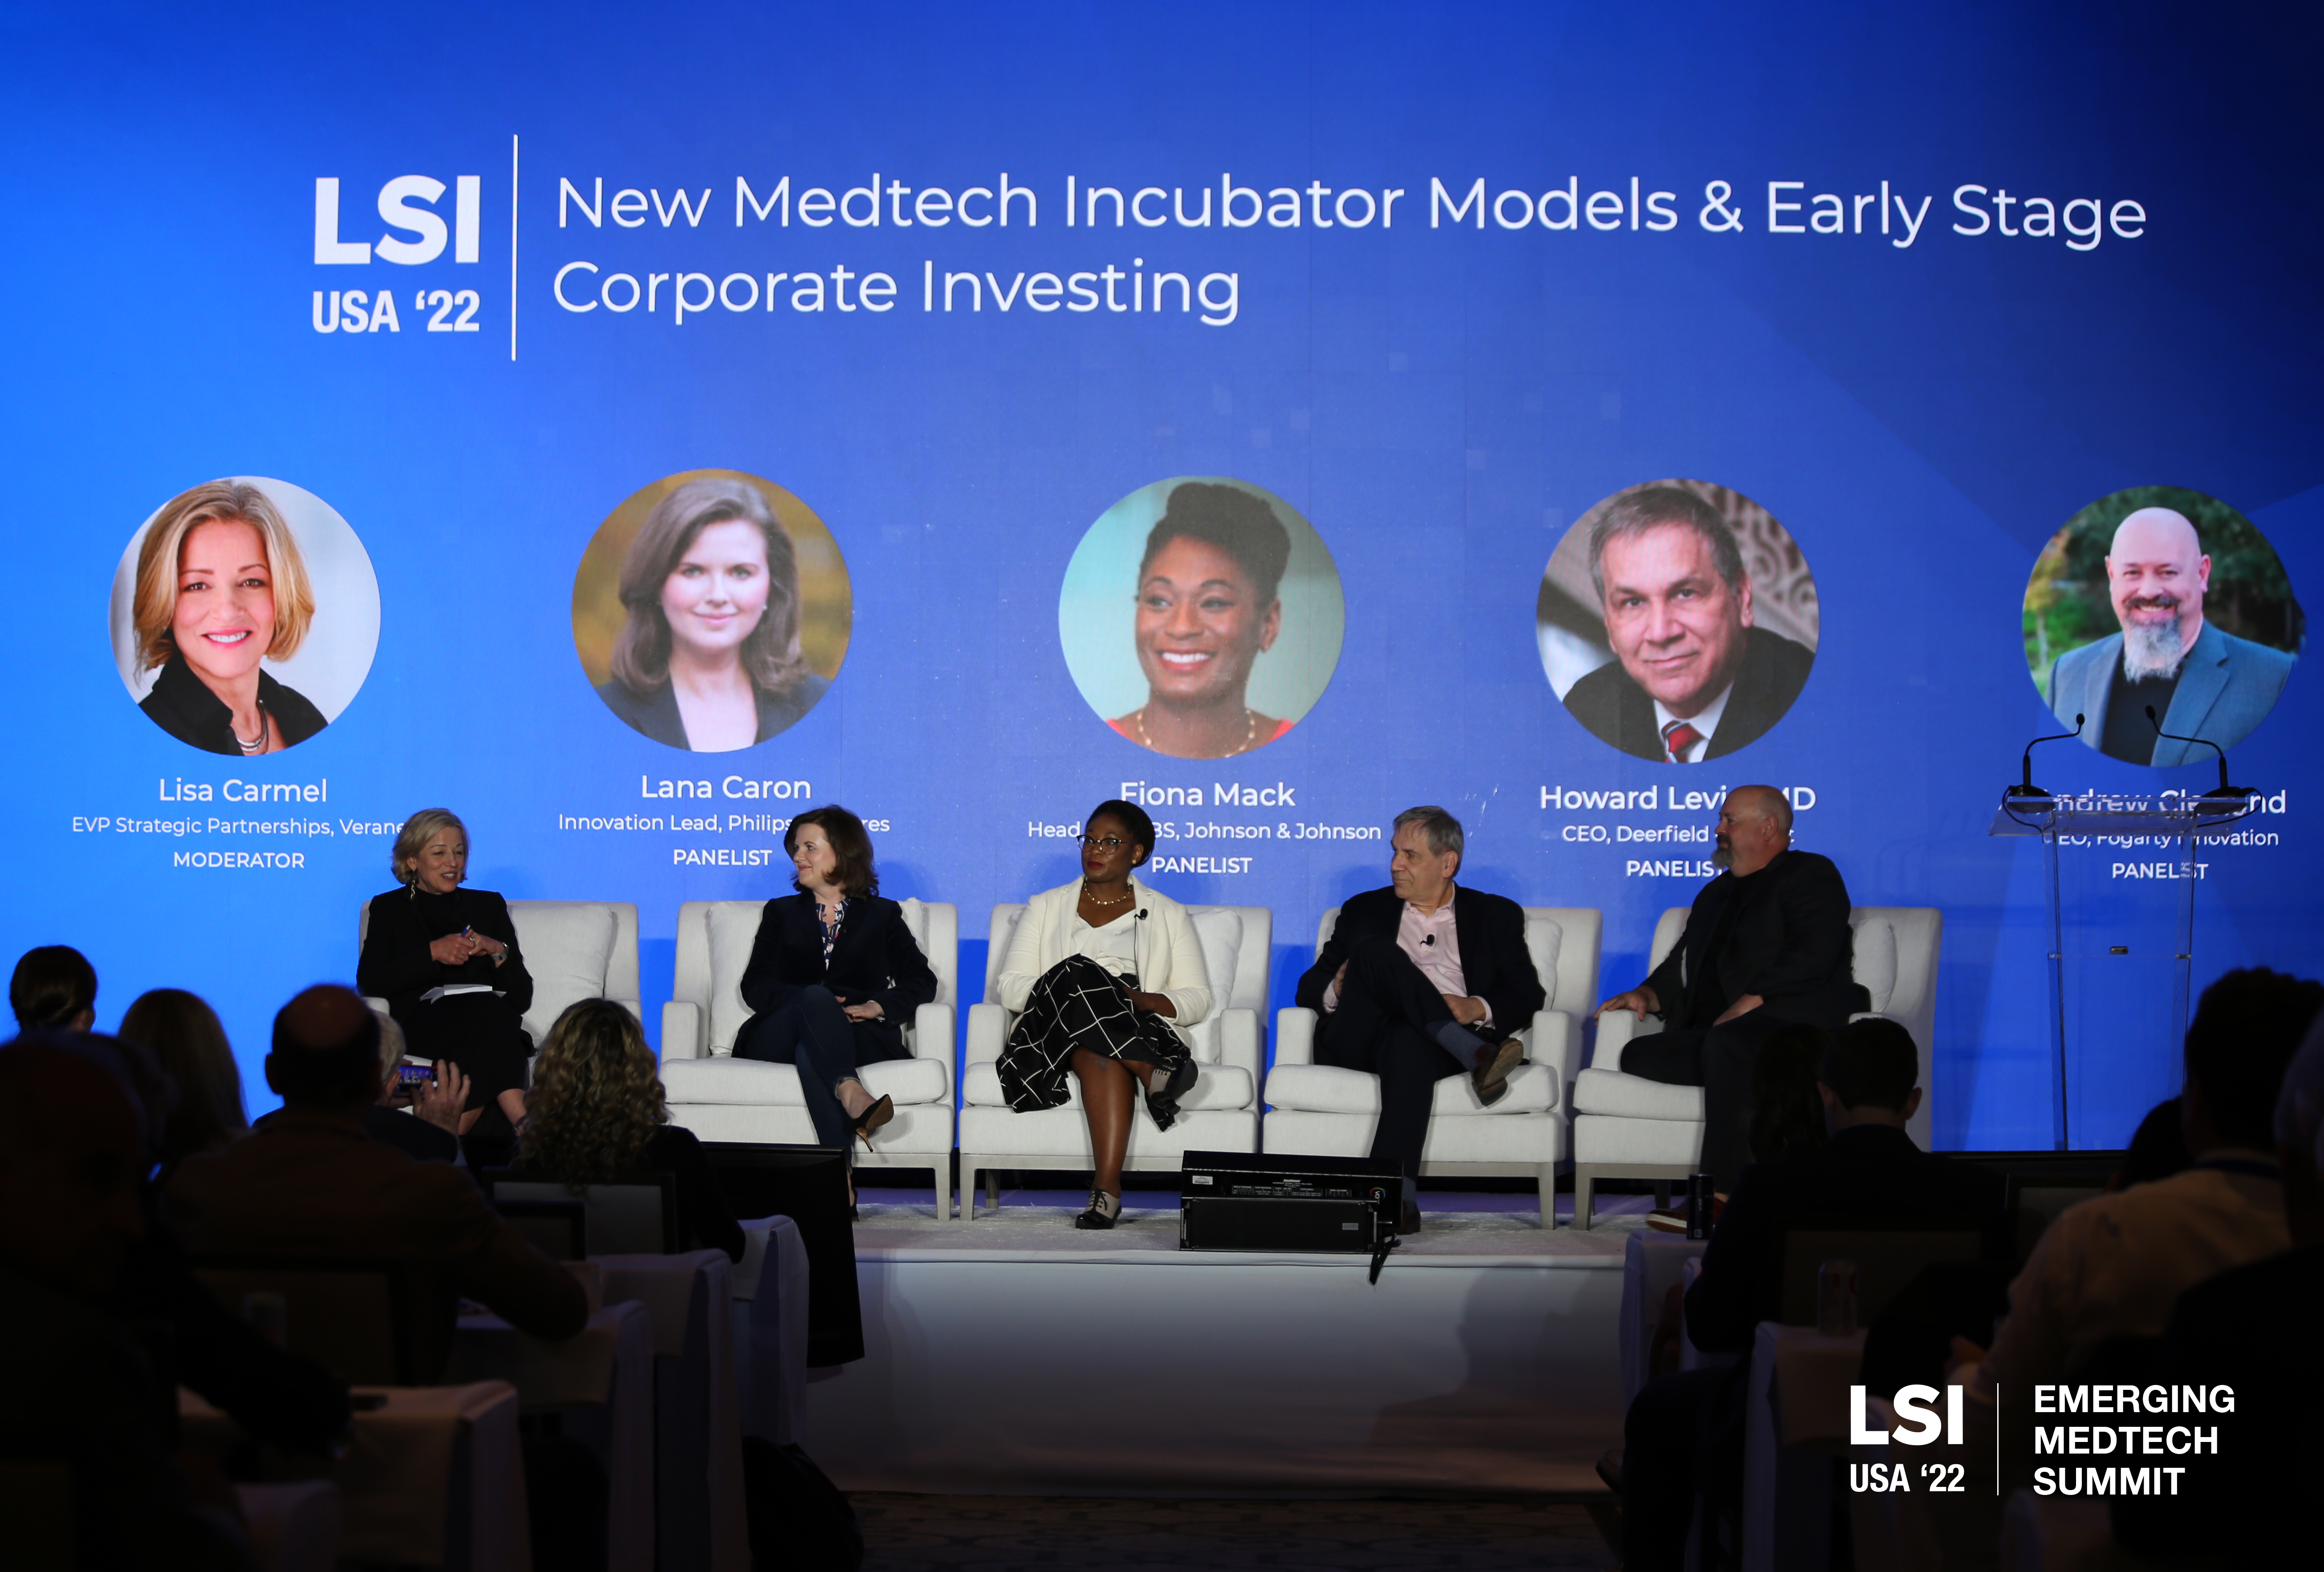 New Medtech Incubator Models & Early Stage Investing